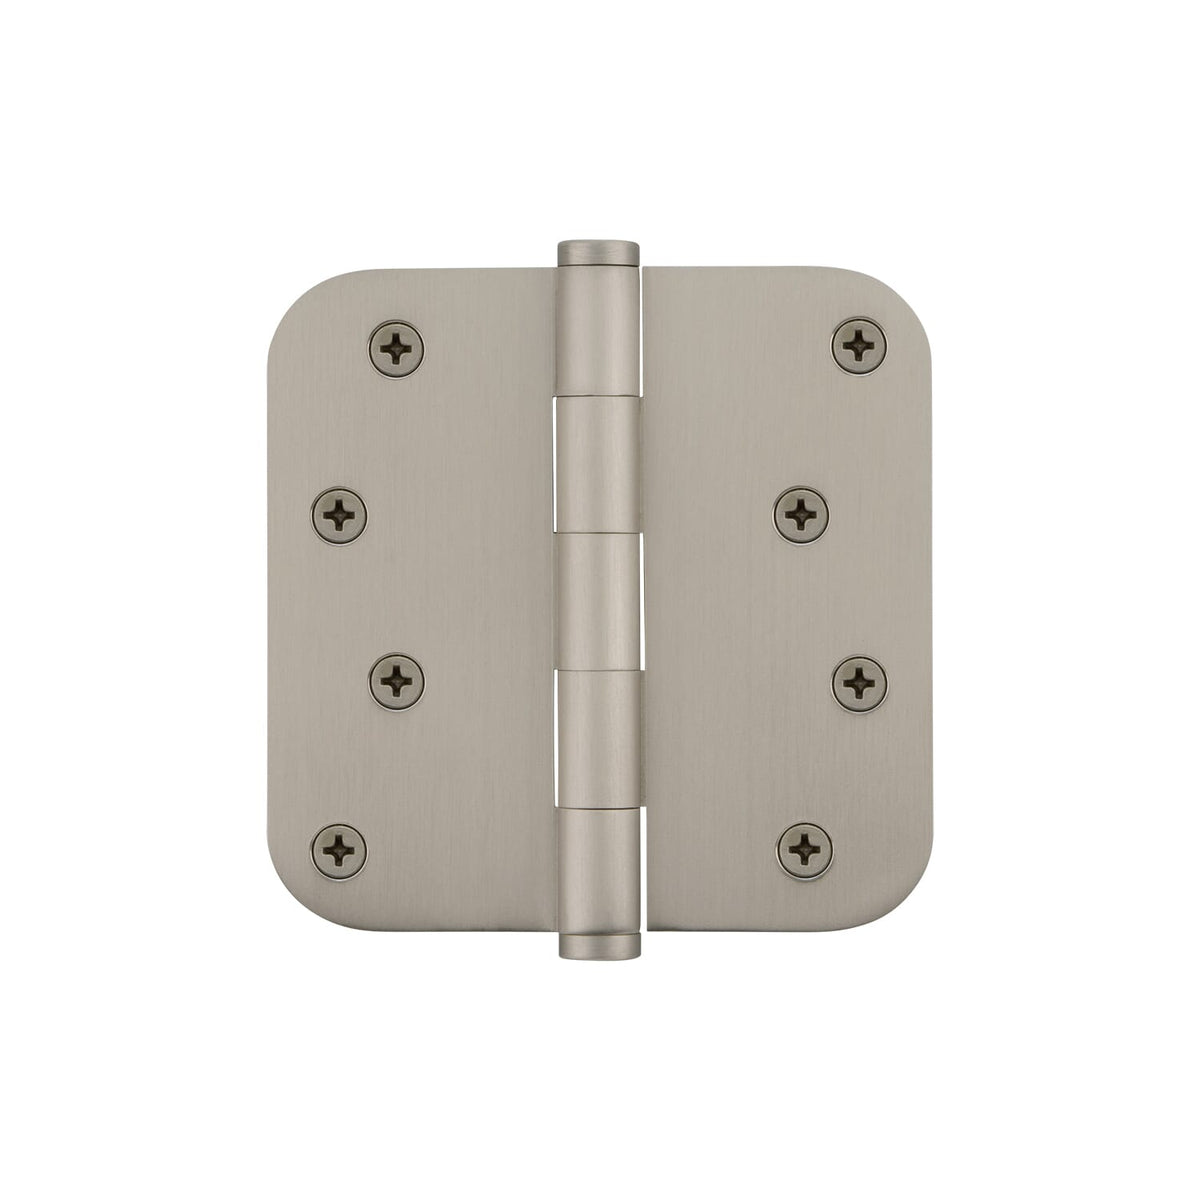 4&quot; Button Tip Residential Hinge with 5/8&quot; Radius Corners in Satin Nickel